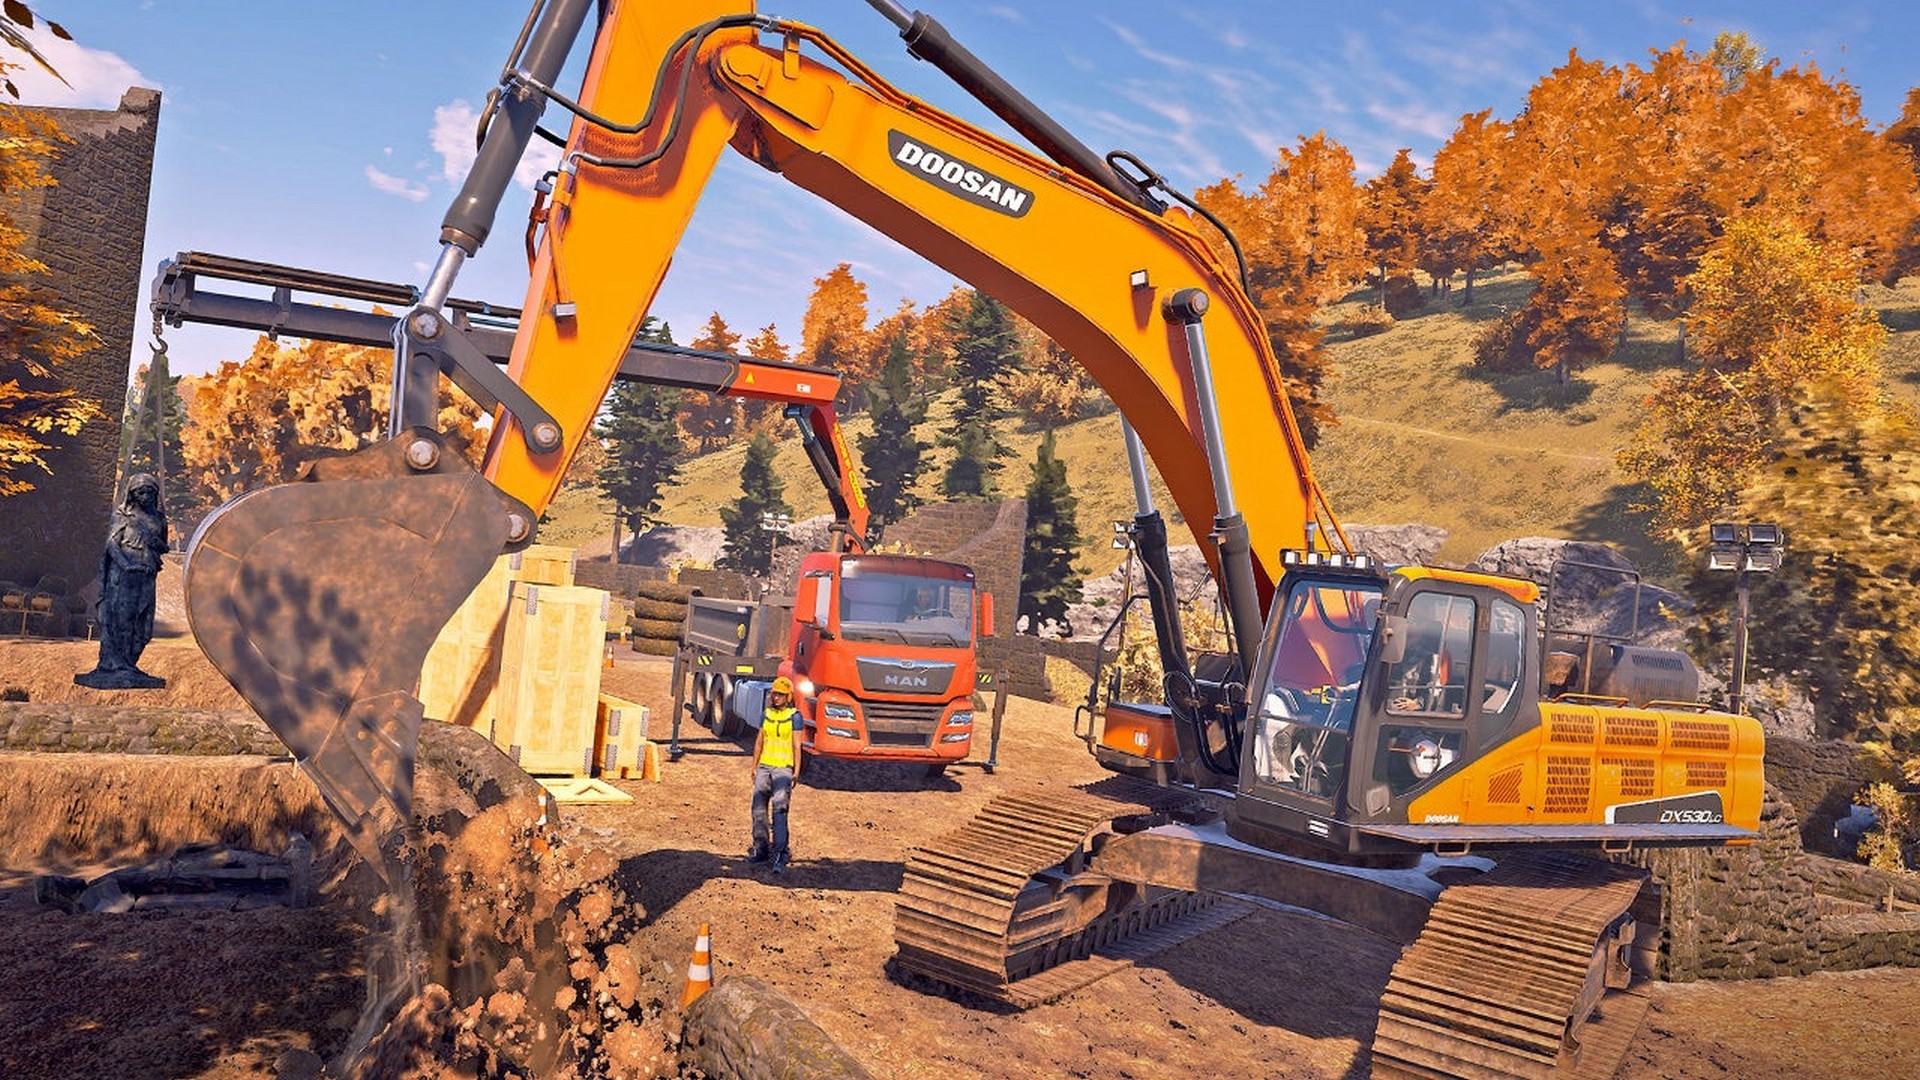 Construction Simulator To Launch With Officially Licensed Machines &  Equipment From 25 World-Renowned Brands | MKAU Gaming